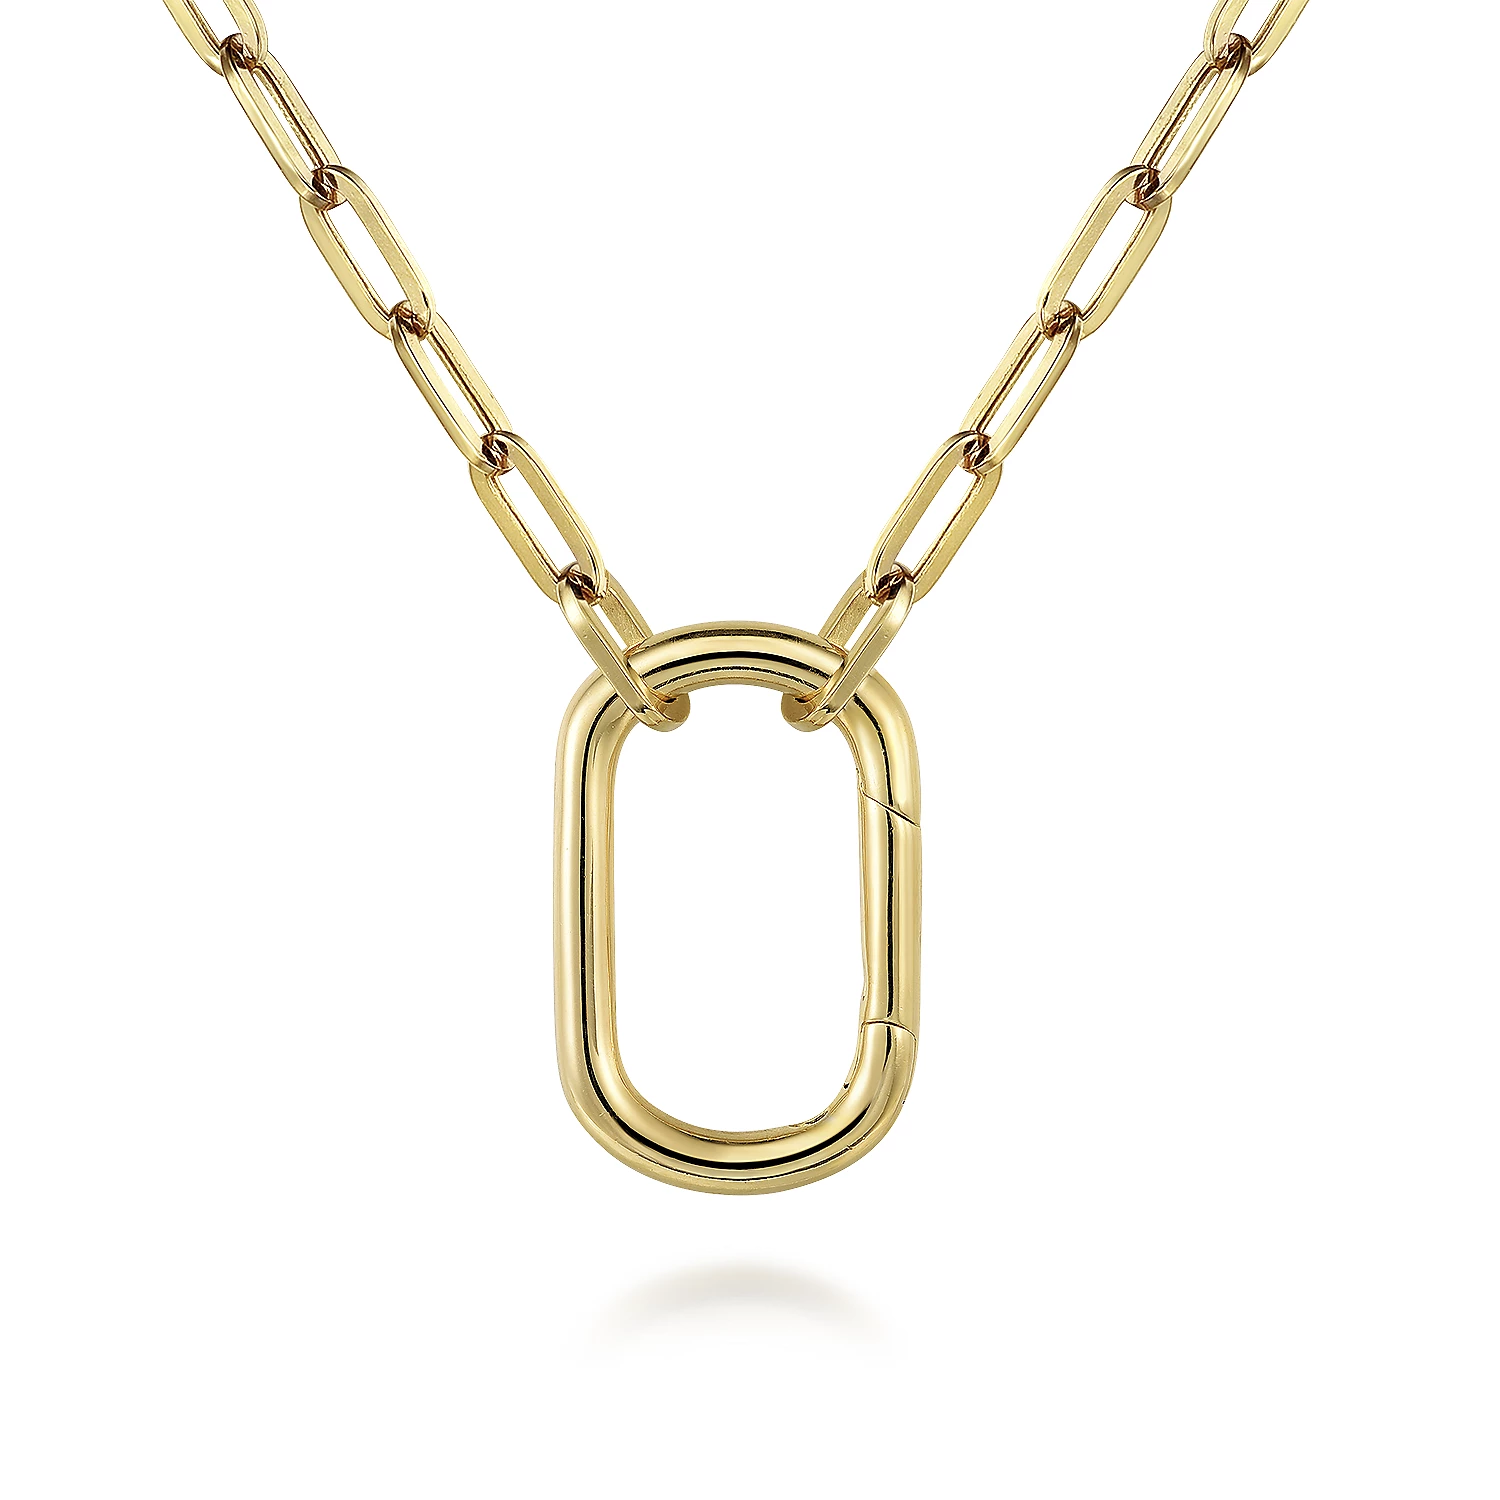 Gold Paperclip Chain Necklace - Gold Paperclip Necklace